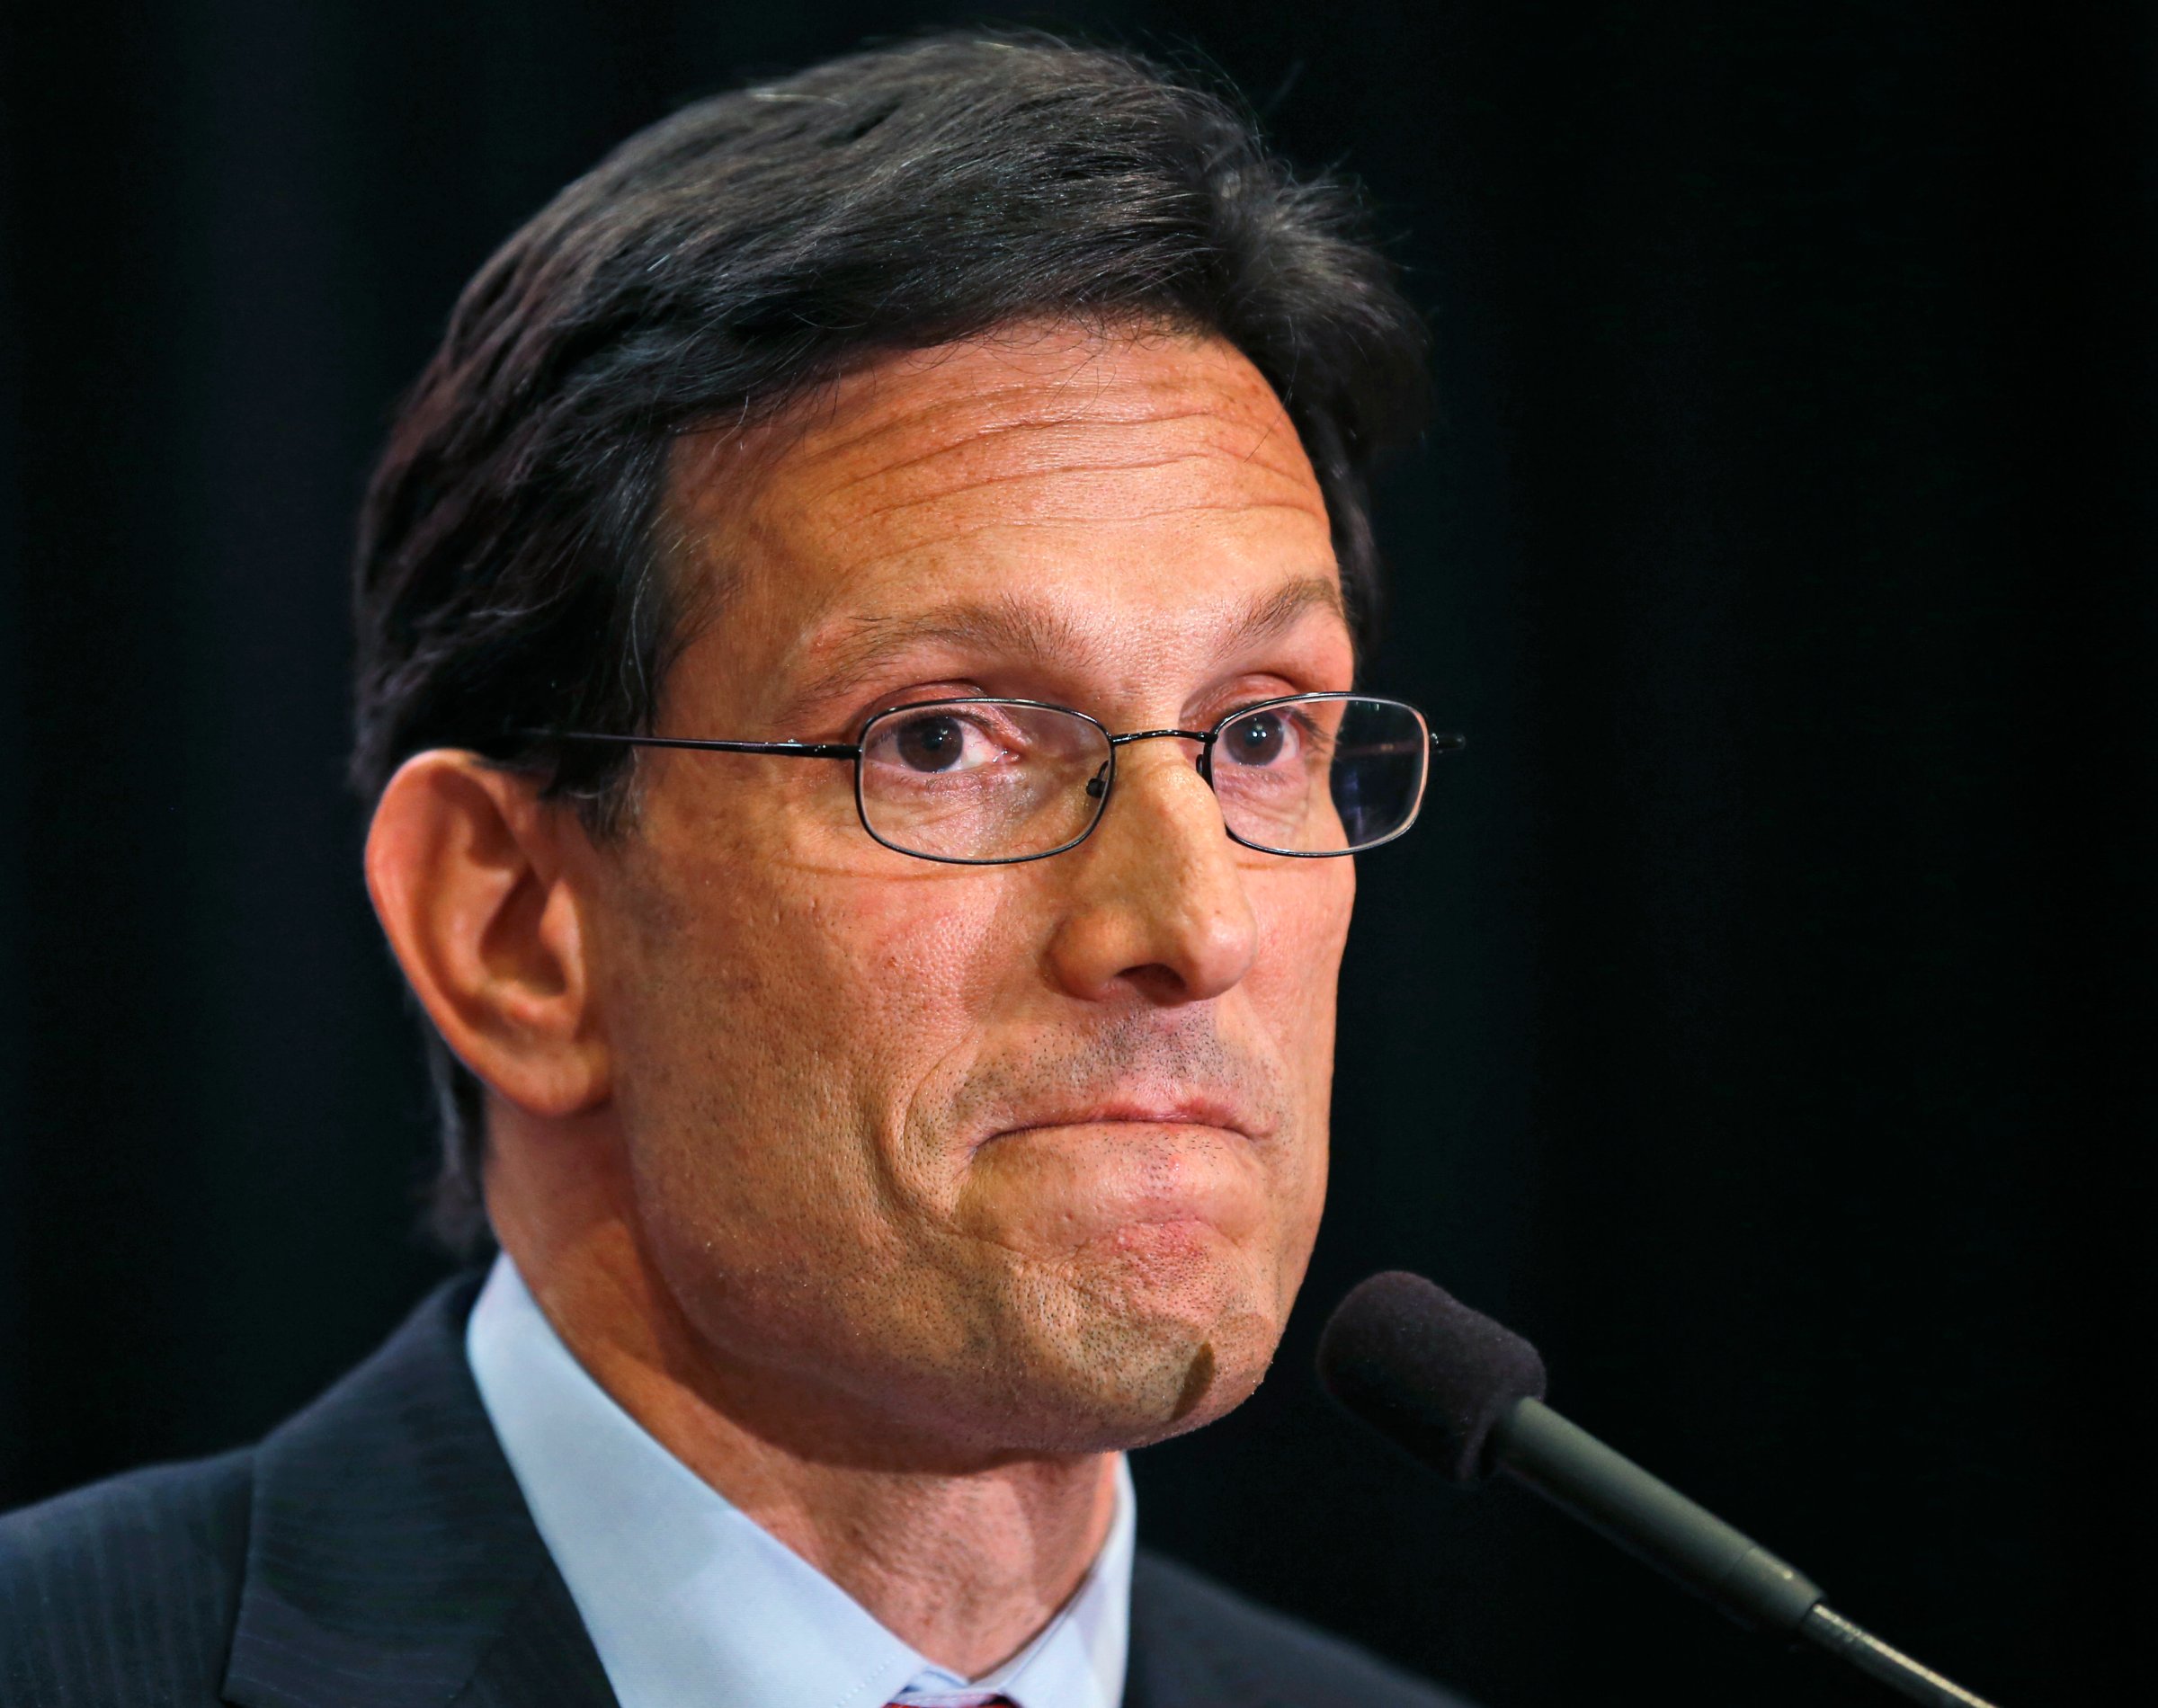 Eric Cantor delivers a speech in Richmond, Va. on June 10, 2014.